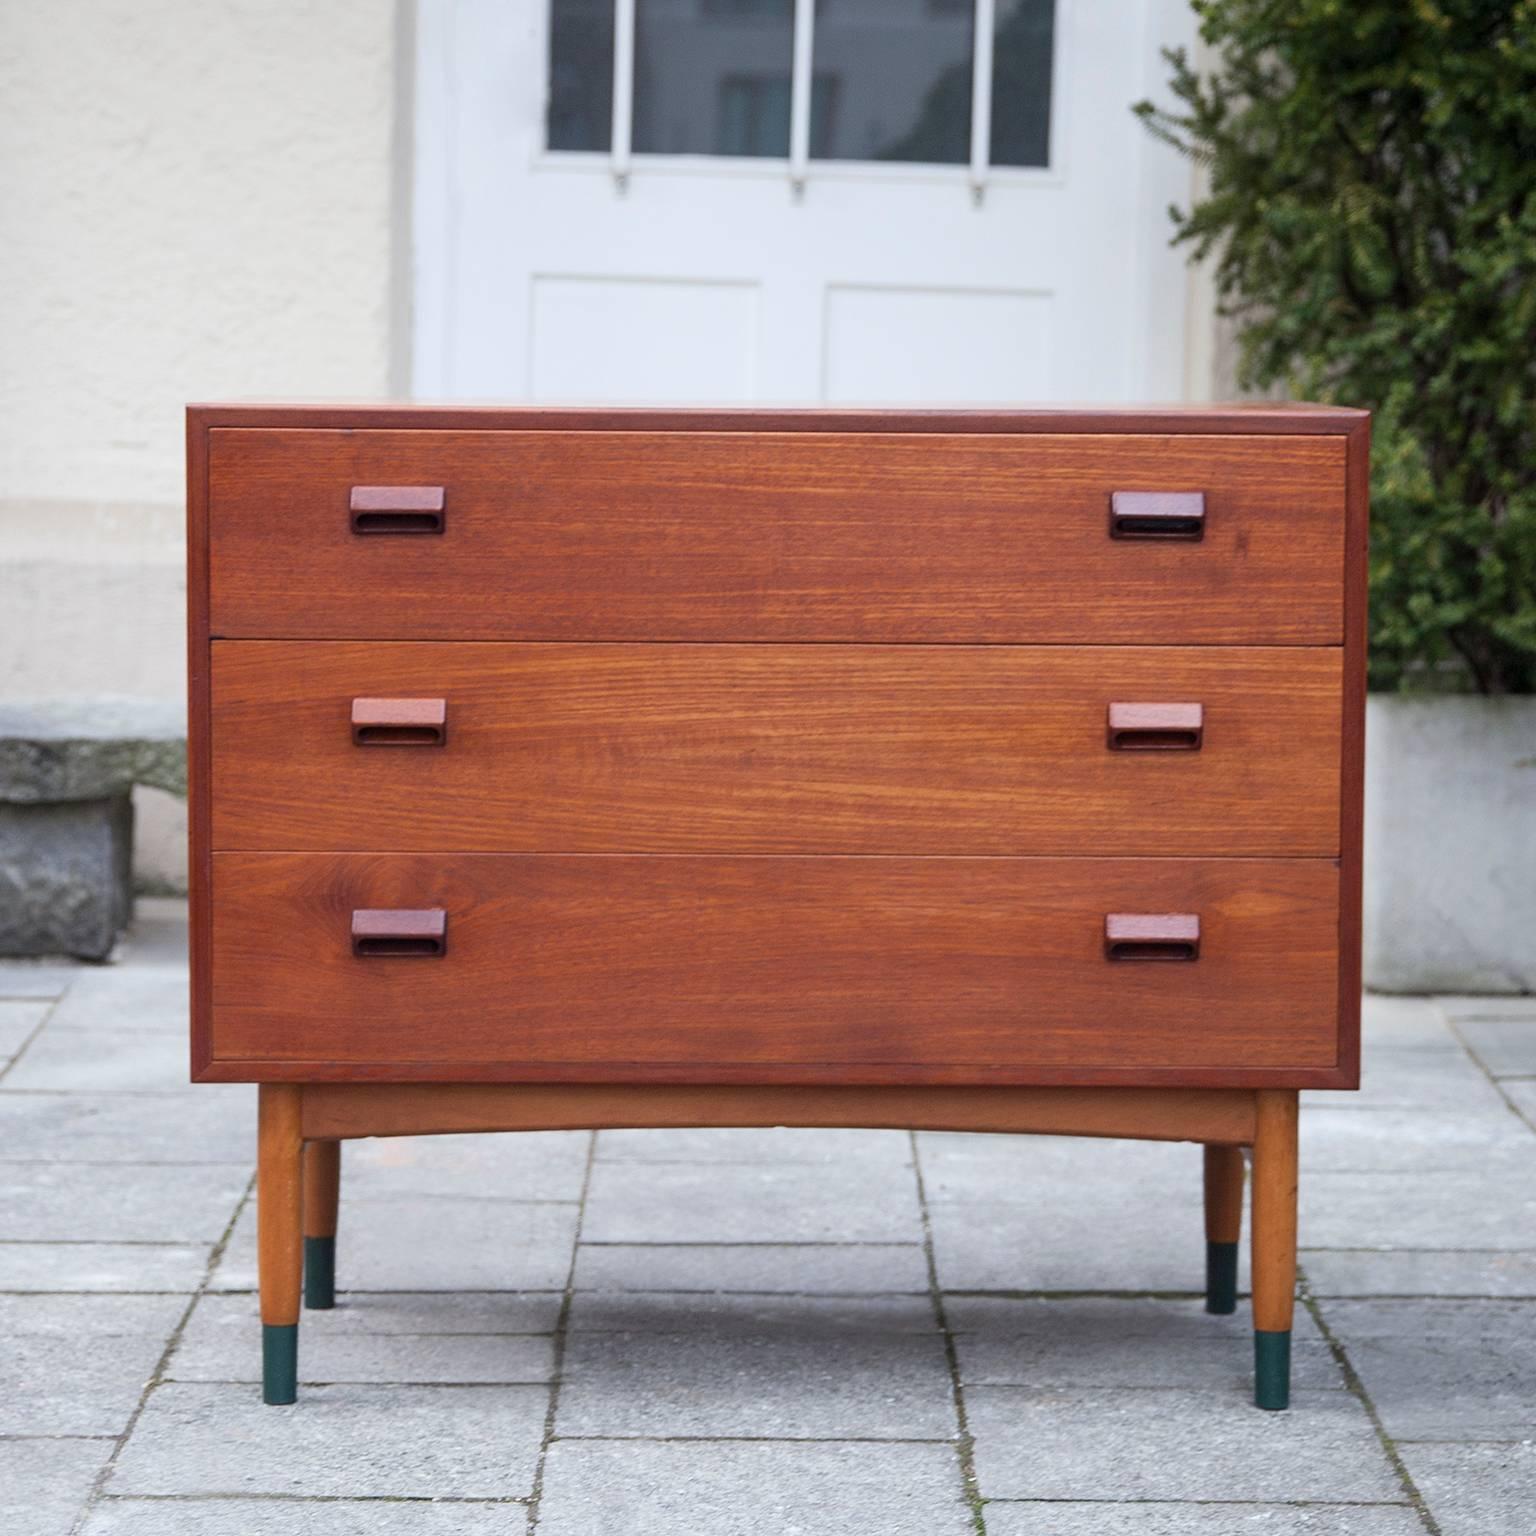 Børge Mogensen designed this vanity dresser or small desk for Søborg Møbelfabrik in 1951. The case is crafted in teak and stands on an oak base with brass ends. Each drawer is adorned with the designer’s signature handle and under the first drawer